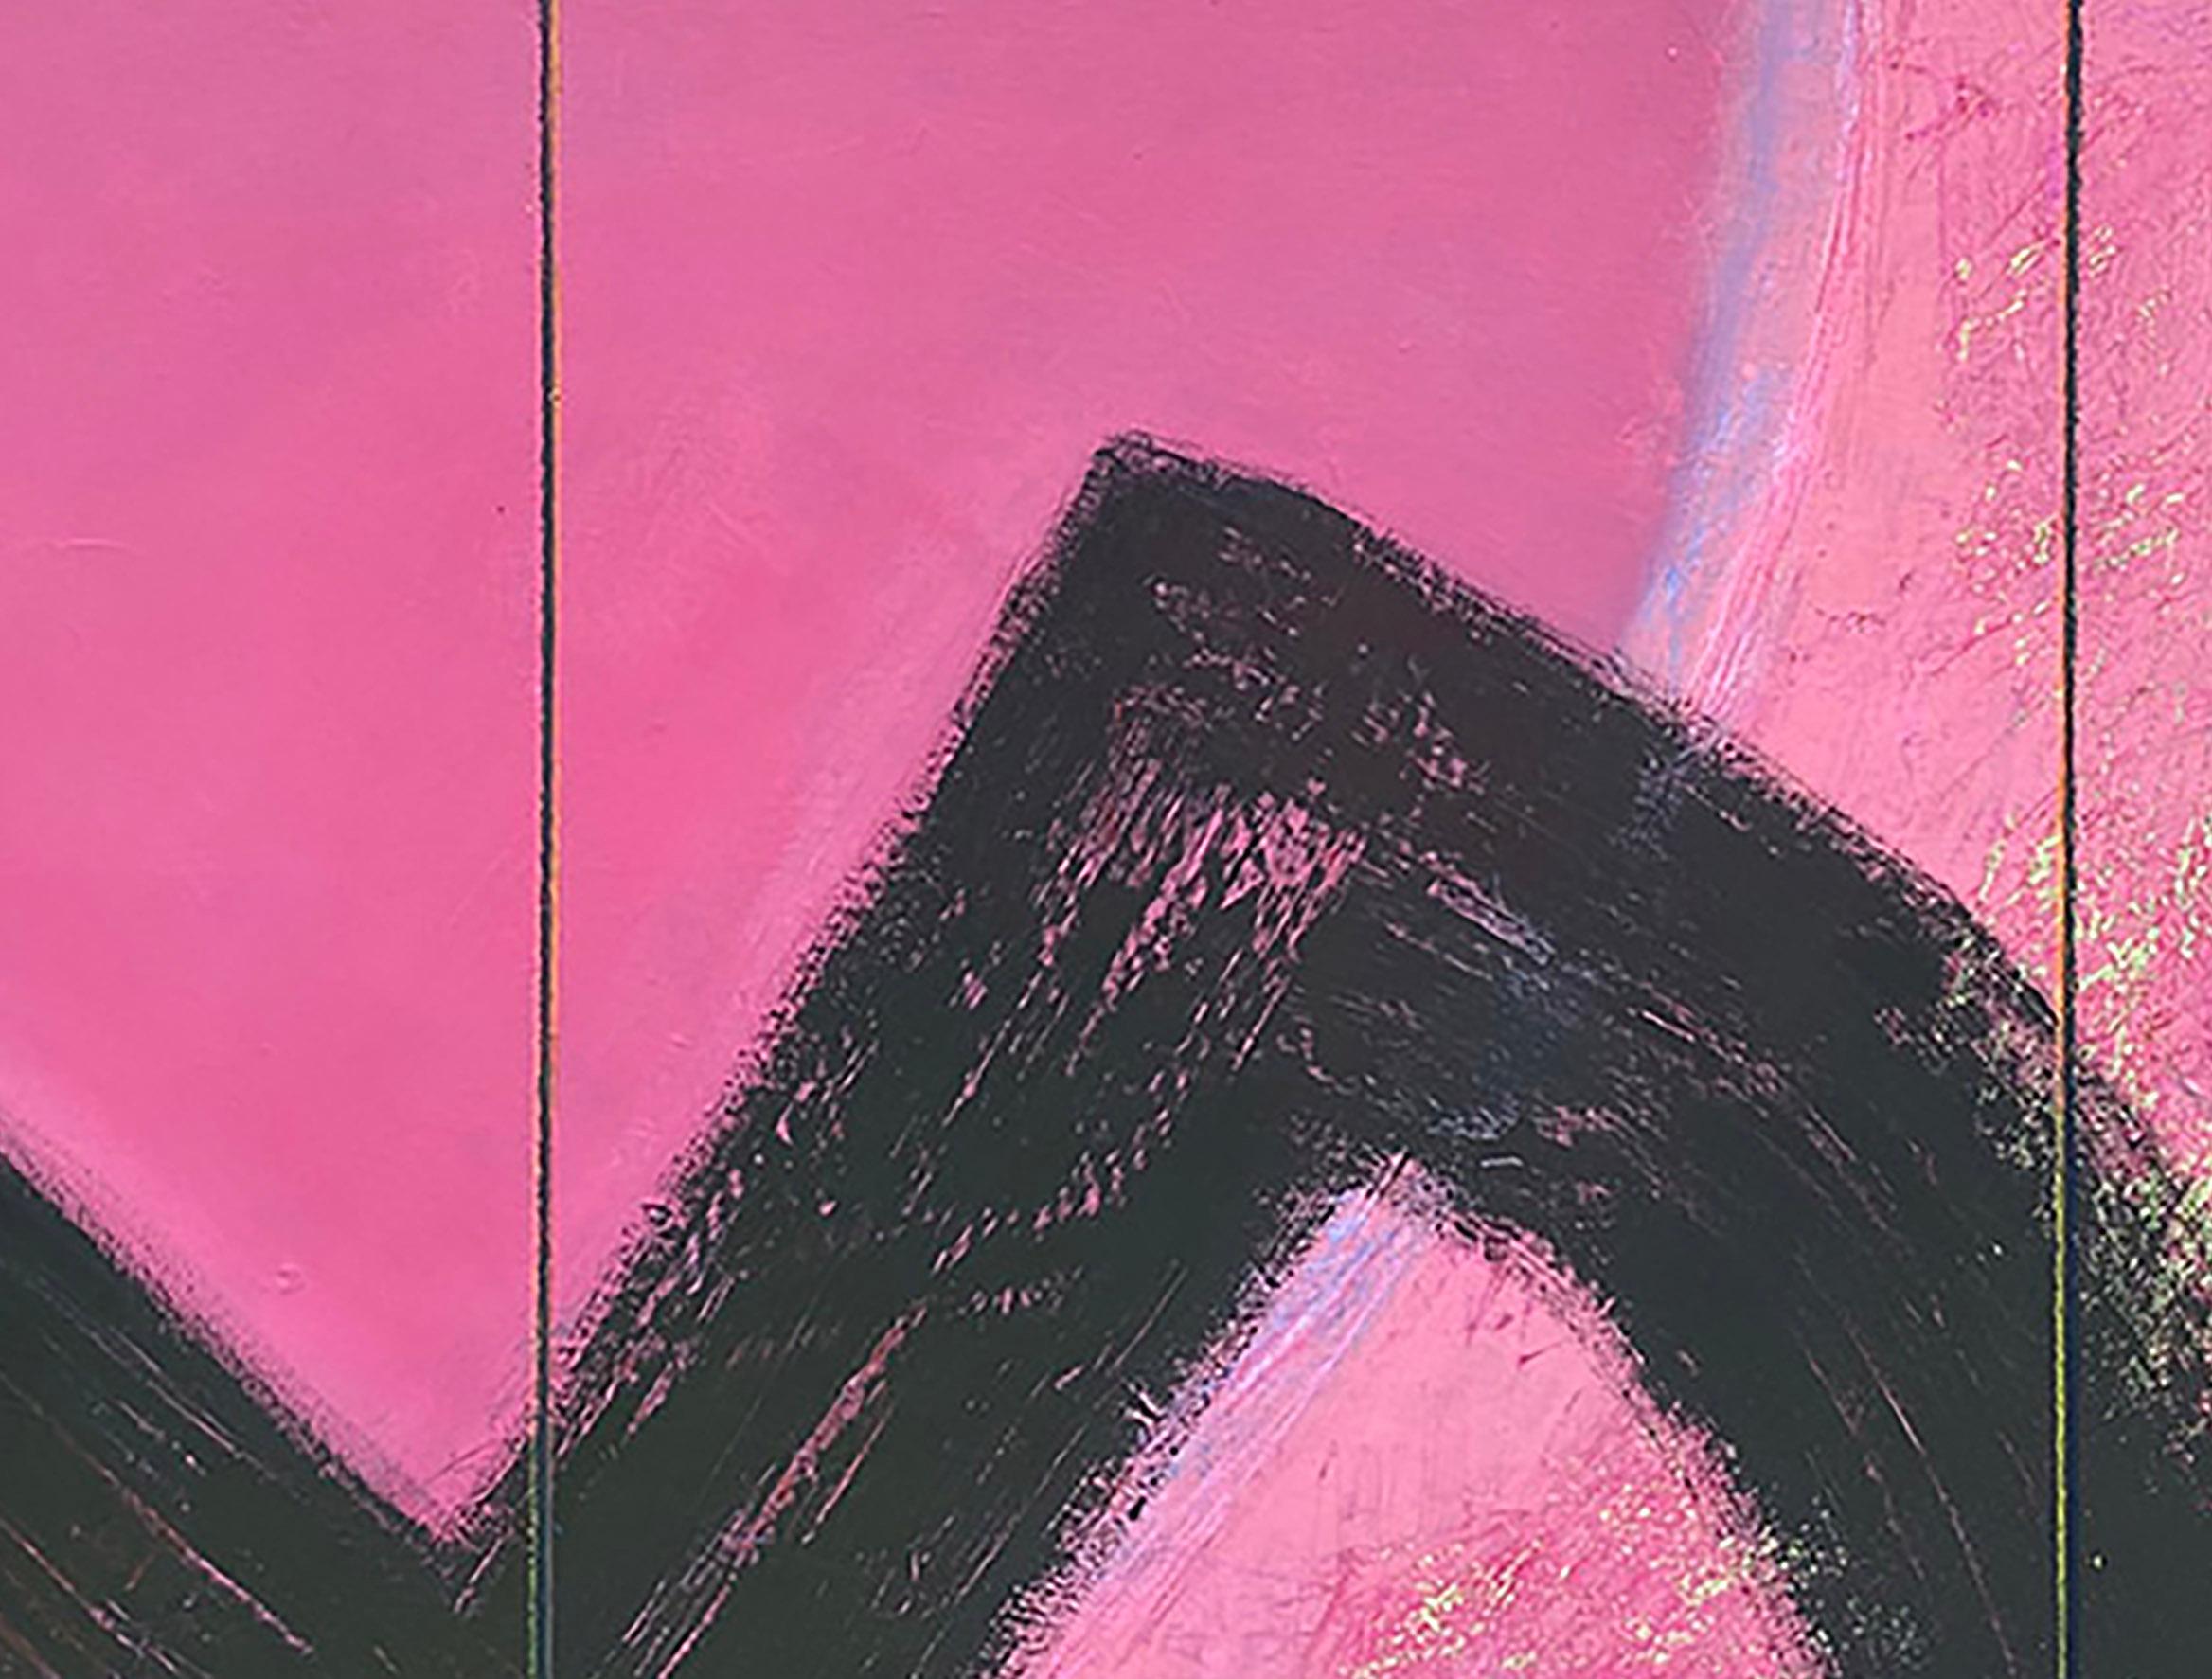 Raise The Bar #2, pink, black, blue, yellow, patterns, script, graphic, abstract - Painting by Ted Dixon